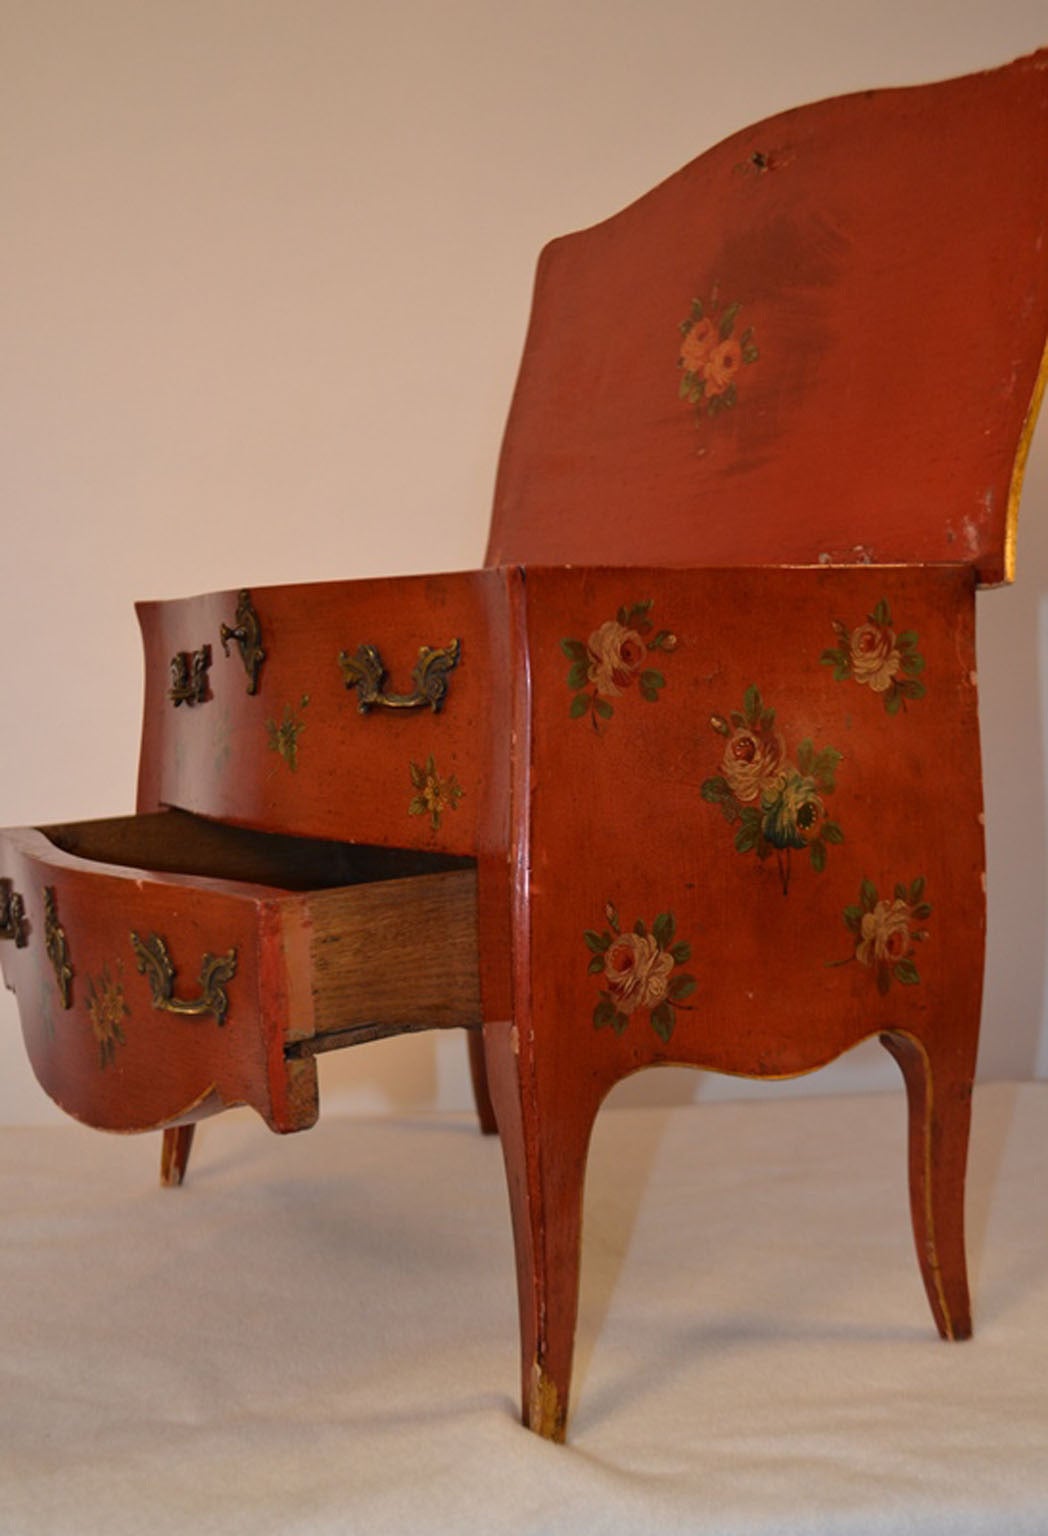 Wood Turn-of-the-century Small Painted Commode, Apprentice Piece